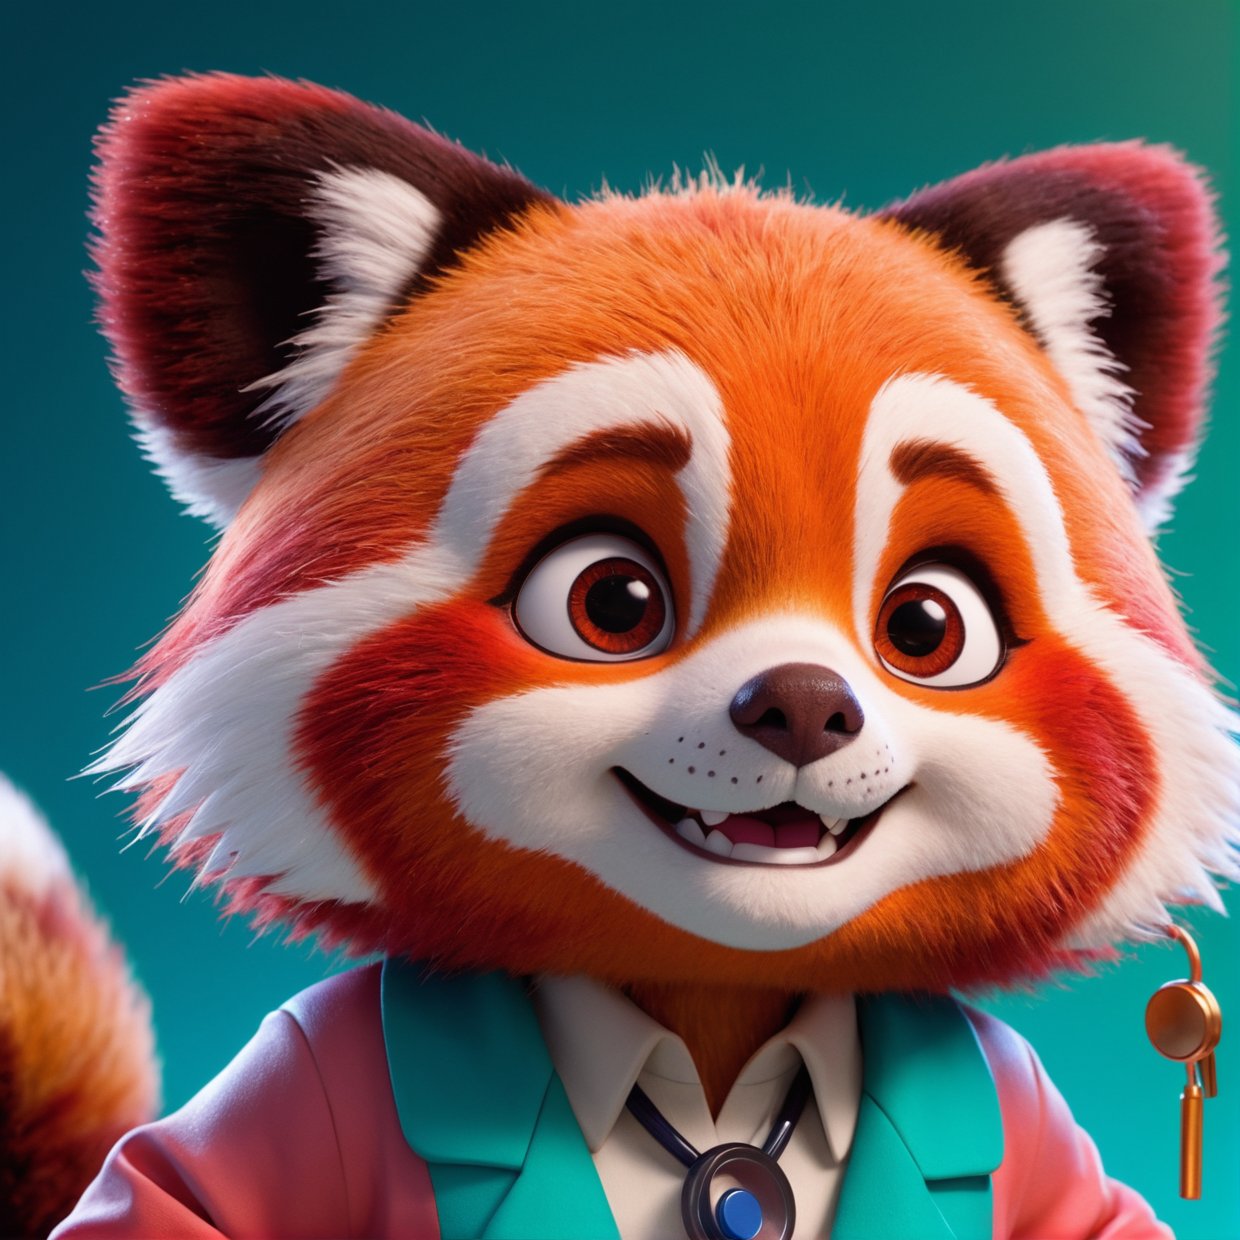 (Masterpiece, Best Quality, Very Detailed CG, Intricate Details: 1.2), 8k Wallpaper, Masterpiece, Best Quality, Award-Limited, High Quality, Super Detail, High Detail, Textured Skin, Cute, UHD, Anatomically Correct, Pixar Style, (A Cute Red Panda Wearing Doctor's Coat: 1.2), Doctor, Happy Sweet Smile. Fairy tale, bright colors, natural light, facial focus, simple background